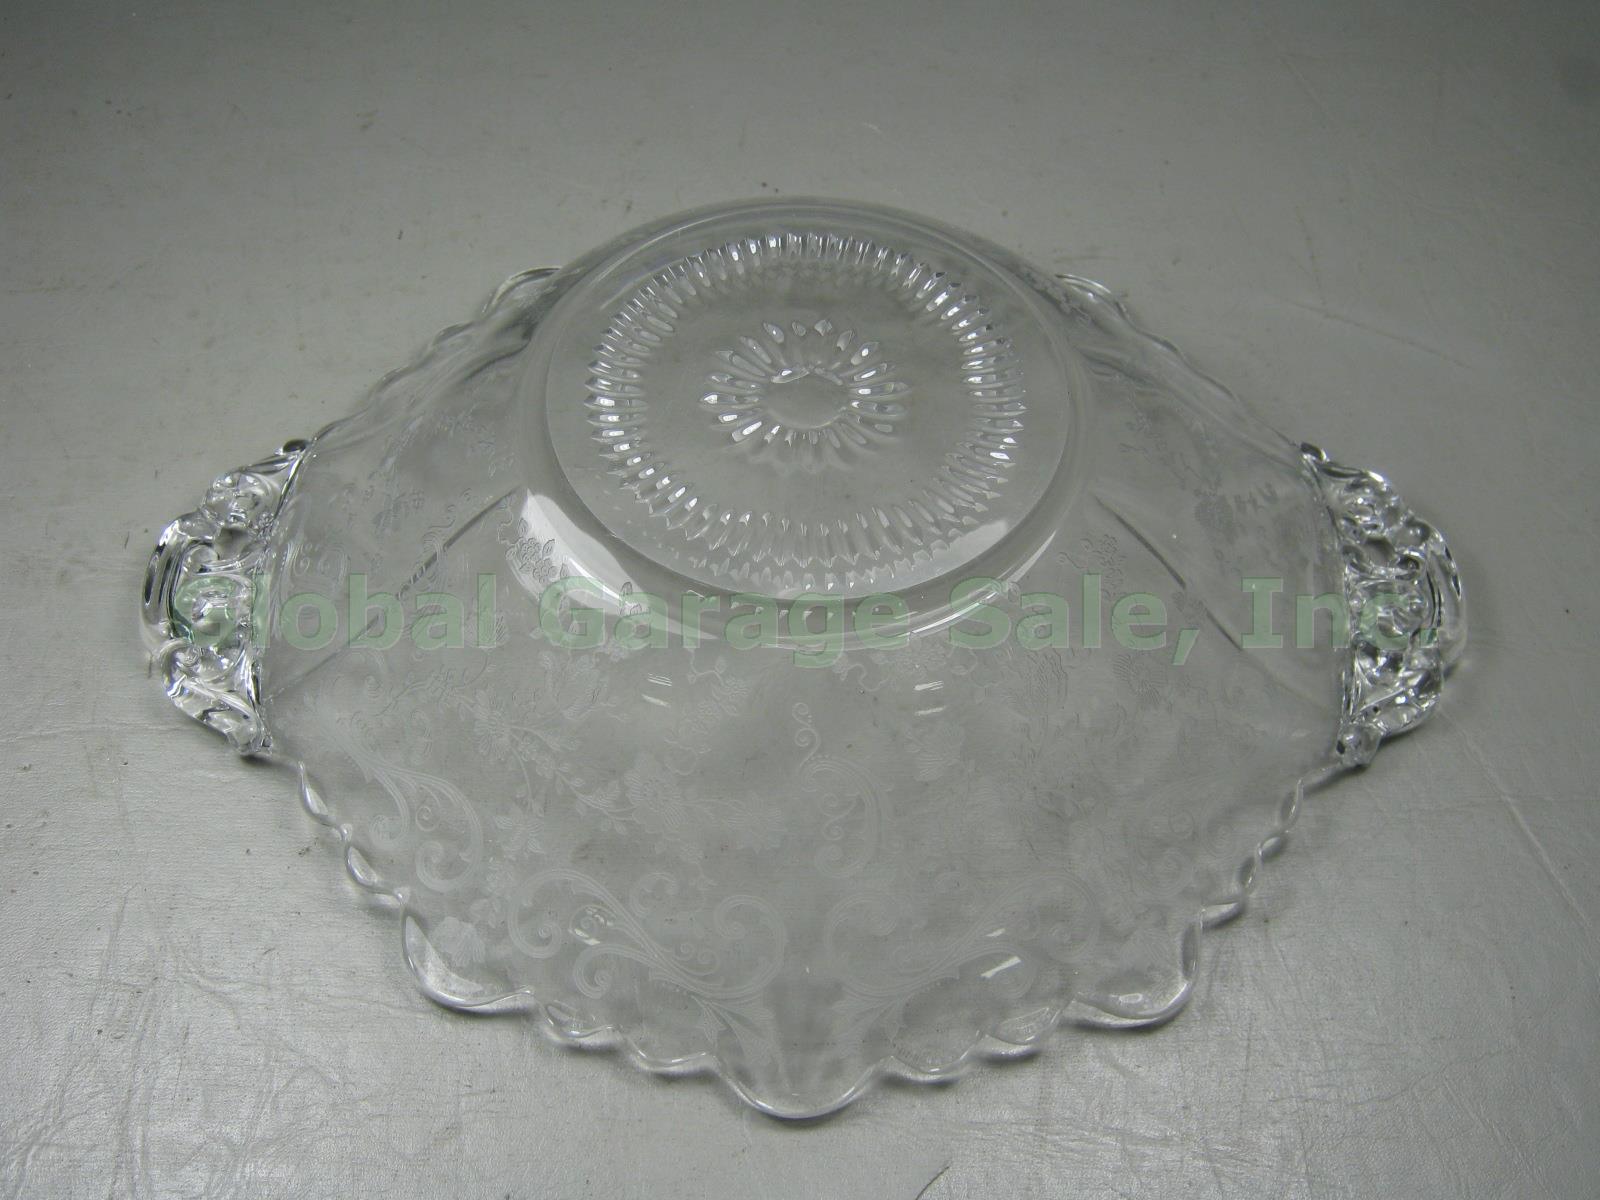 Cambridge Chantilly Etched Glass Serving Bowl Dish Handled Cake Plate Platter NR 6